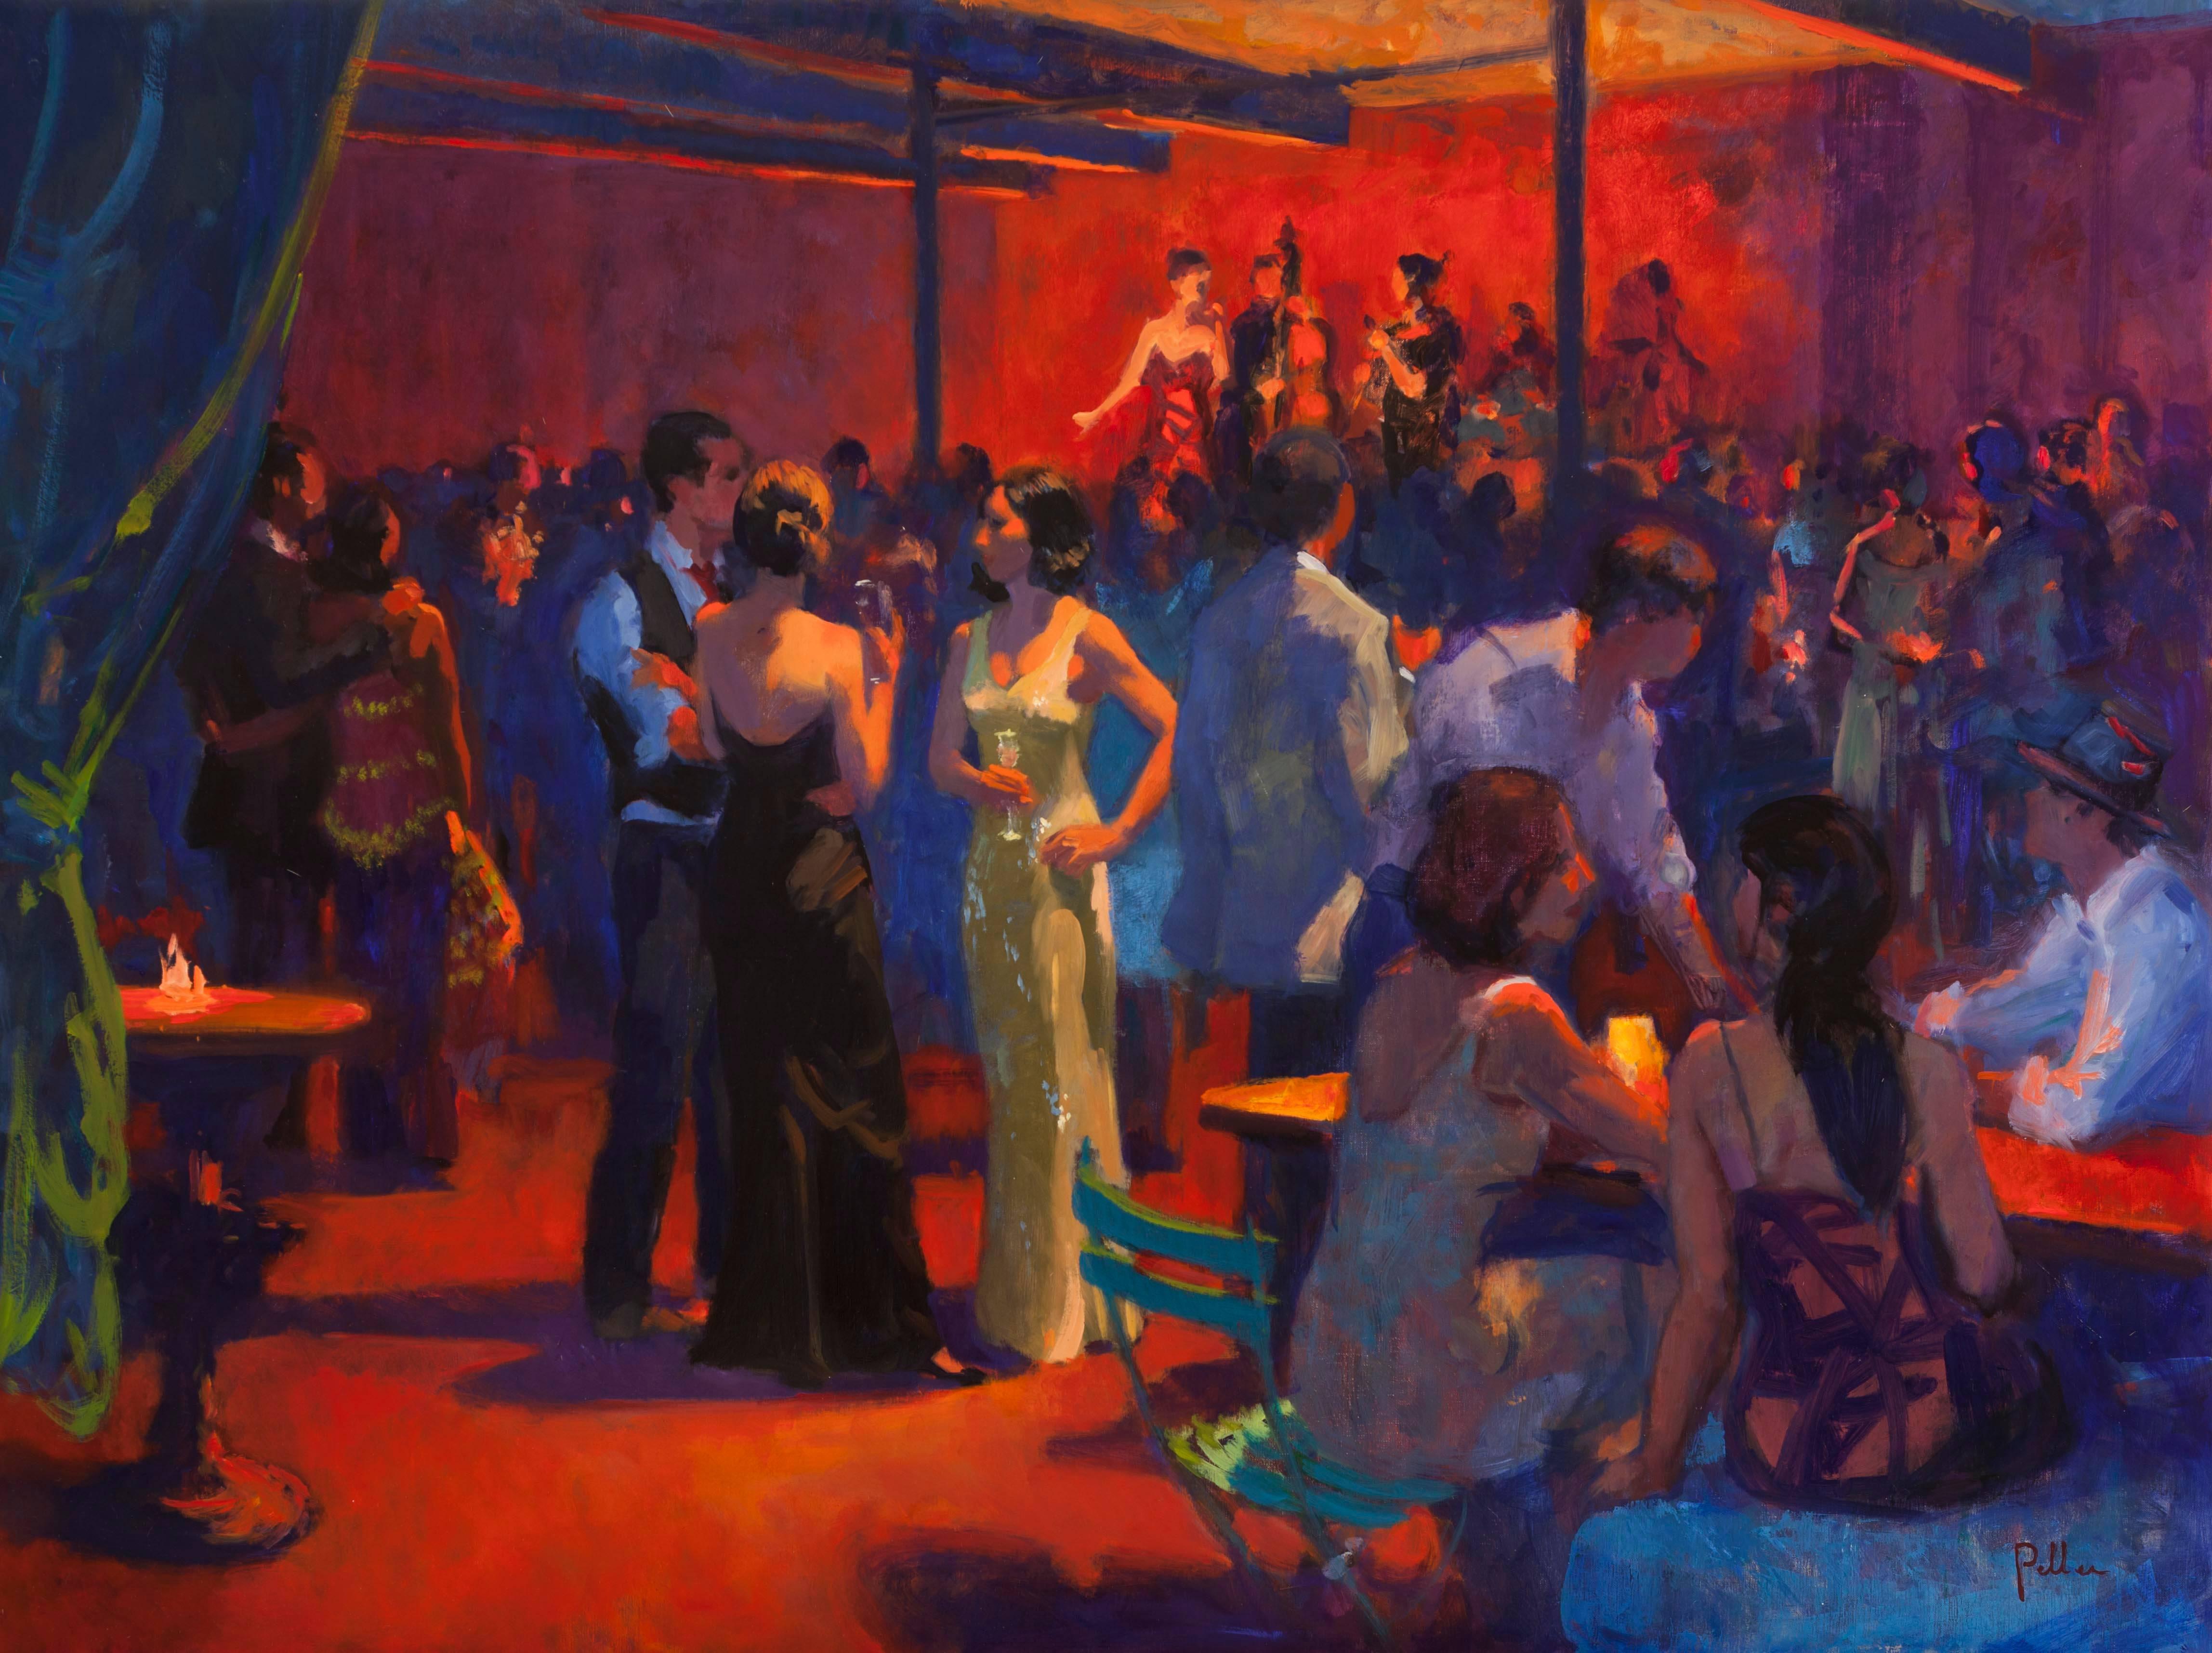 Joseph Peller Figurative Painting - After Hours Club